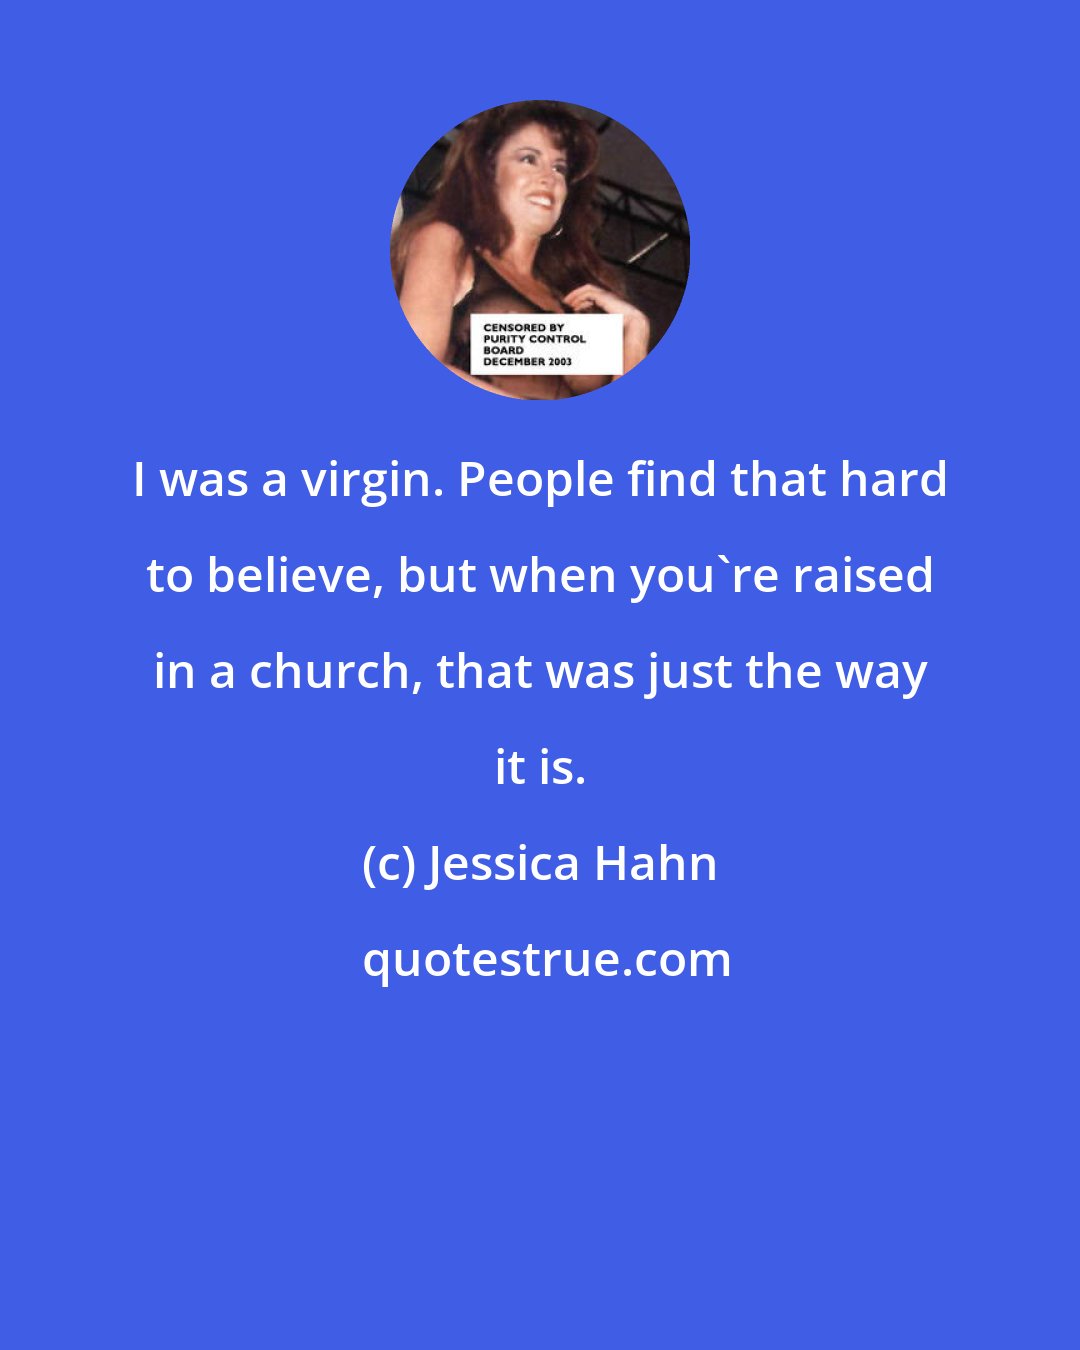 Jessica Hahn: I was a virgin. People find that hard to believe, but when you're raised in a church, that was just the way it is.